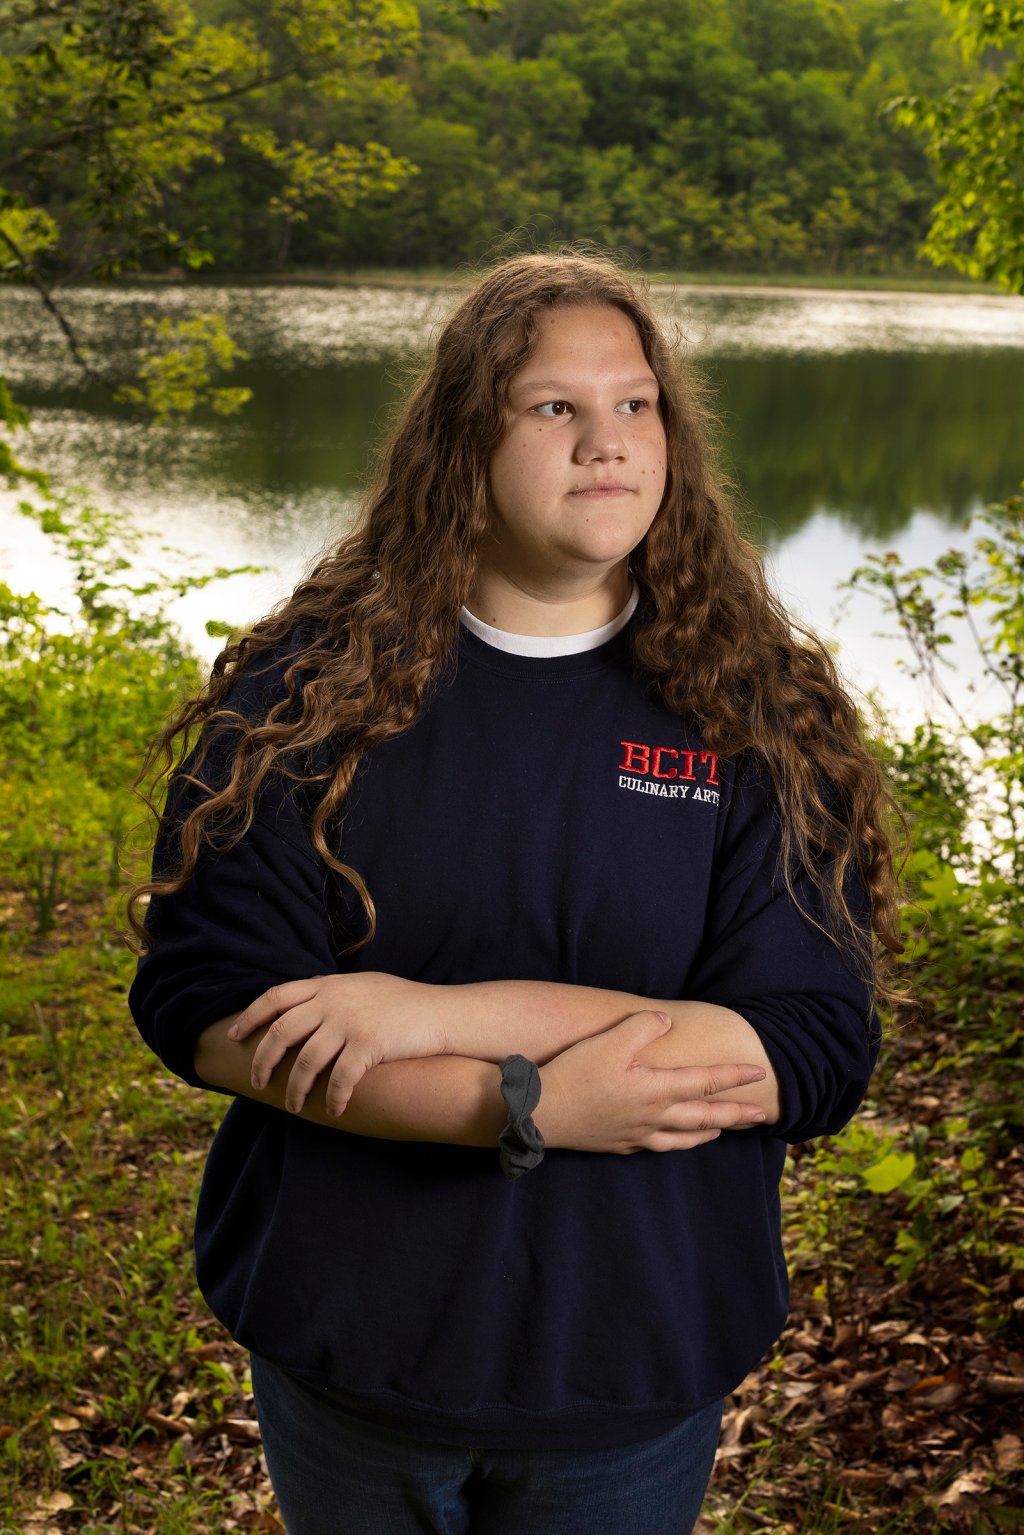 “They not only helped me find coping mechanisms and skills, they gave me people to talk to who were like me and were my age. And it really just helped put things into perspective. It was game changing," says camper Addison Aquilino.